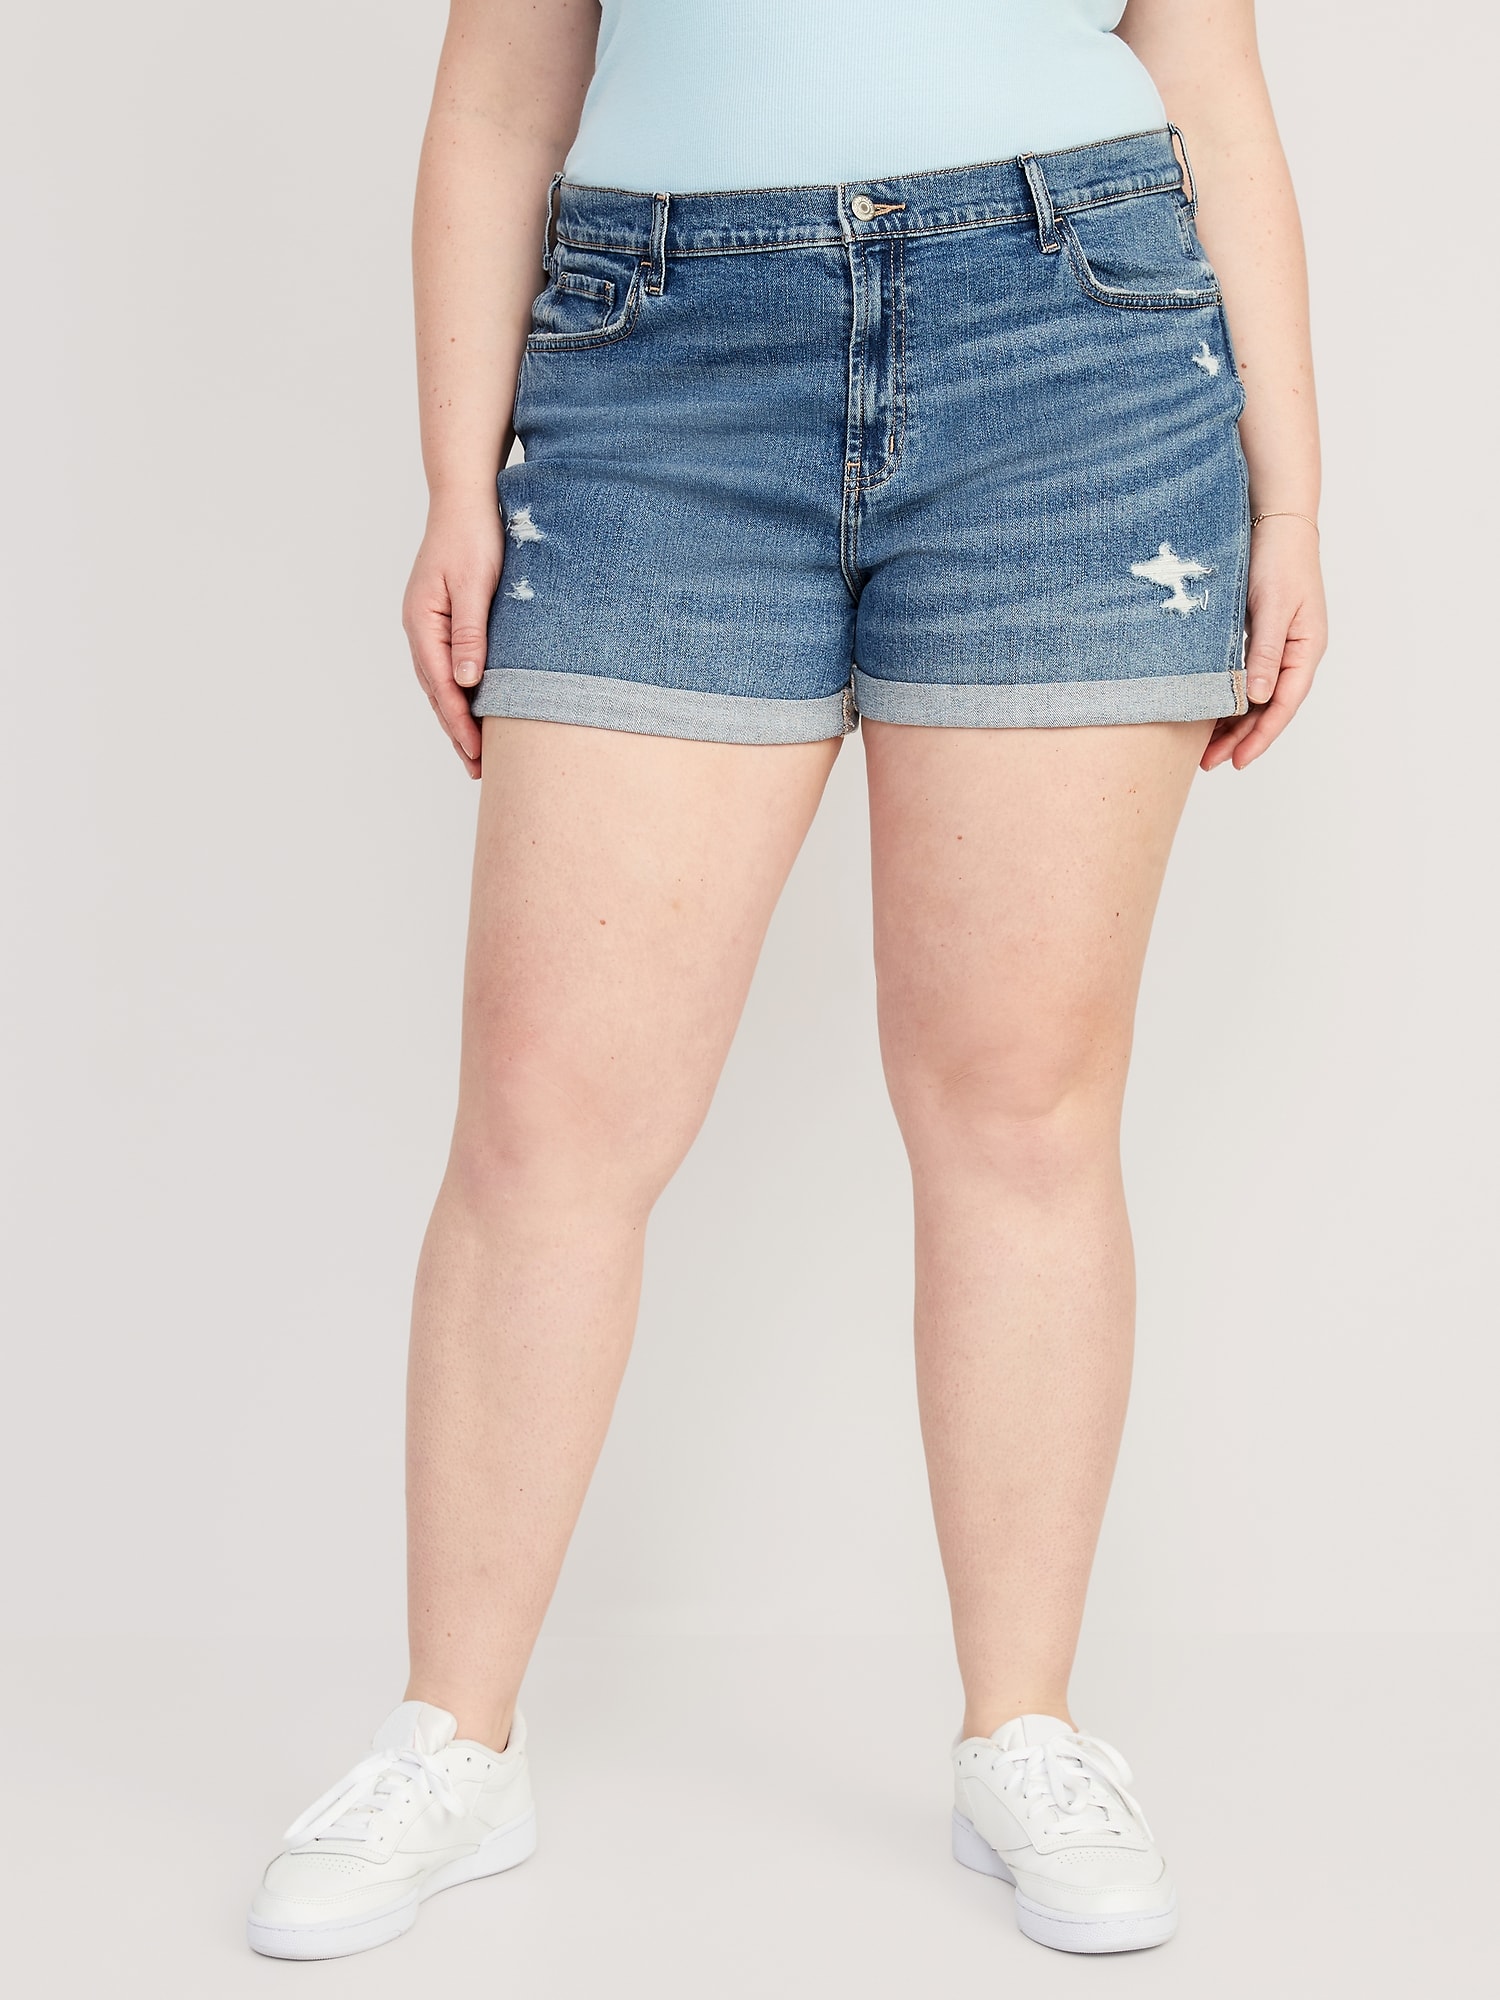 Mid-Rise Ripped Boyfriend Jean Shorts for Women -- 3-inch inseam | Old Navy